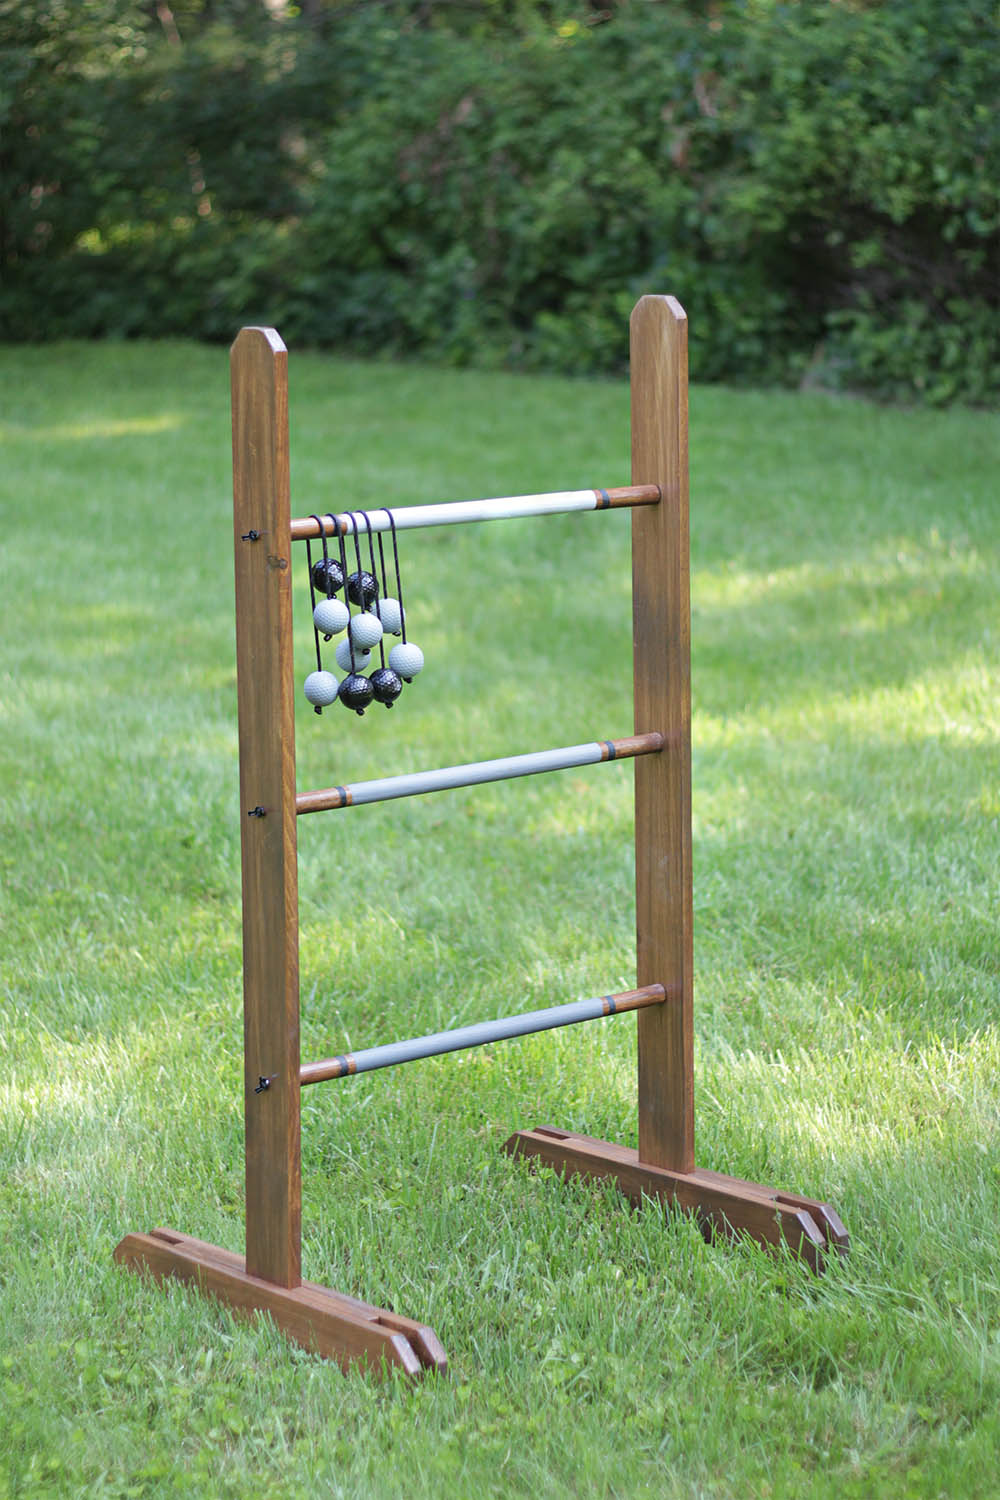 Ladder Ball Game by High Five 